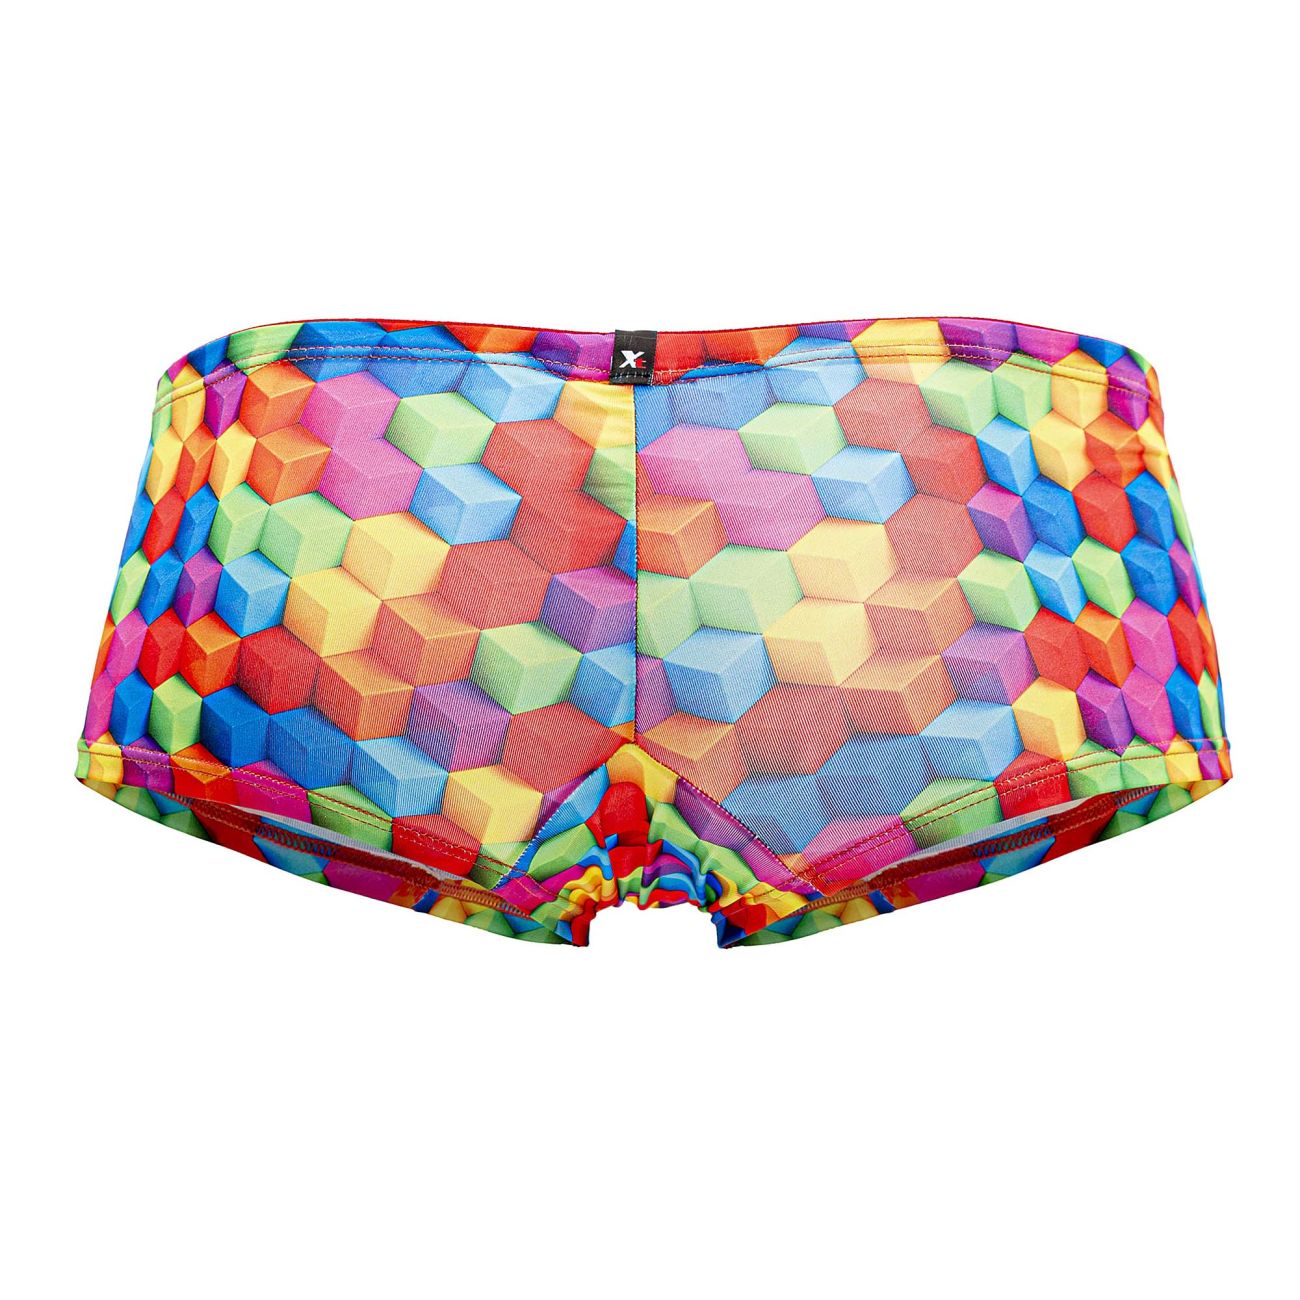 Xtremen 91170 Printed Trunks Cubes